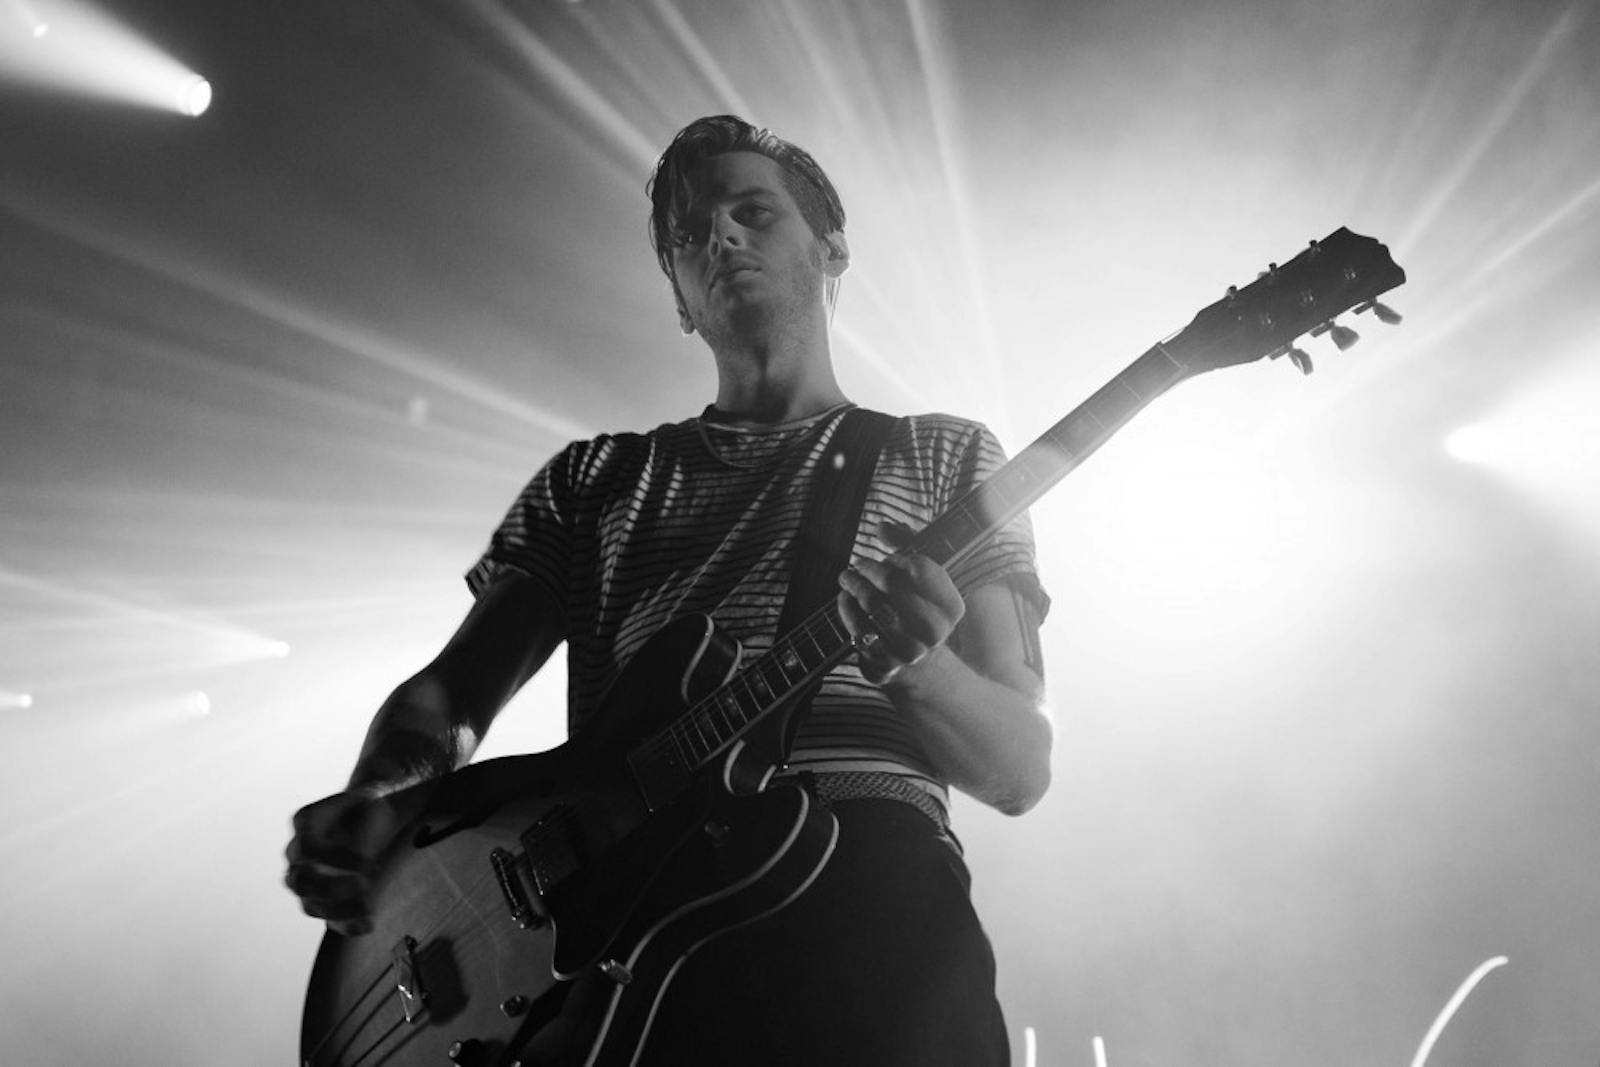 Gallery Foster the People rocked ASU at InfernoFest The Arizona